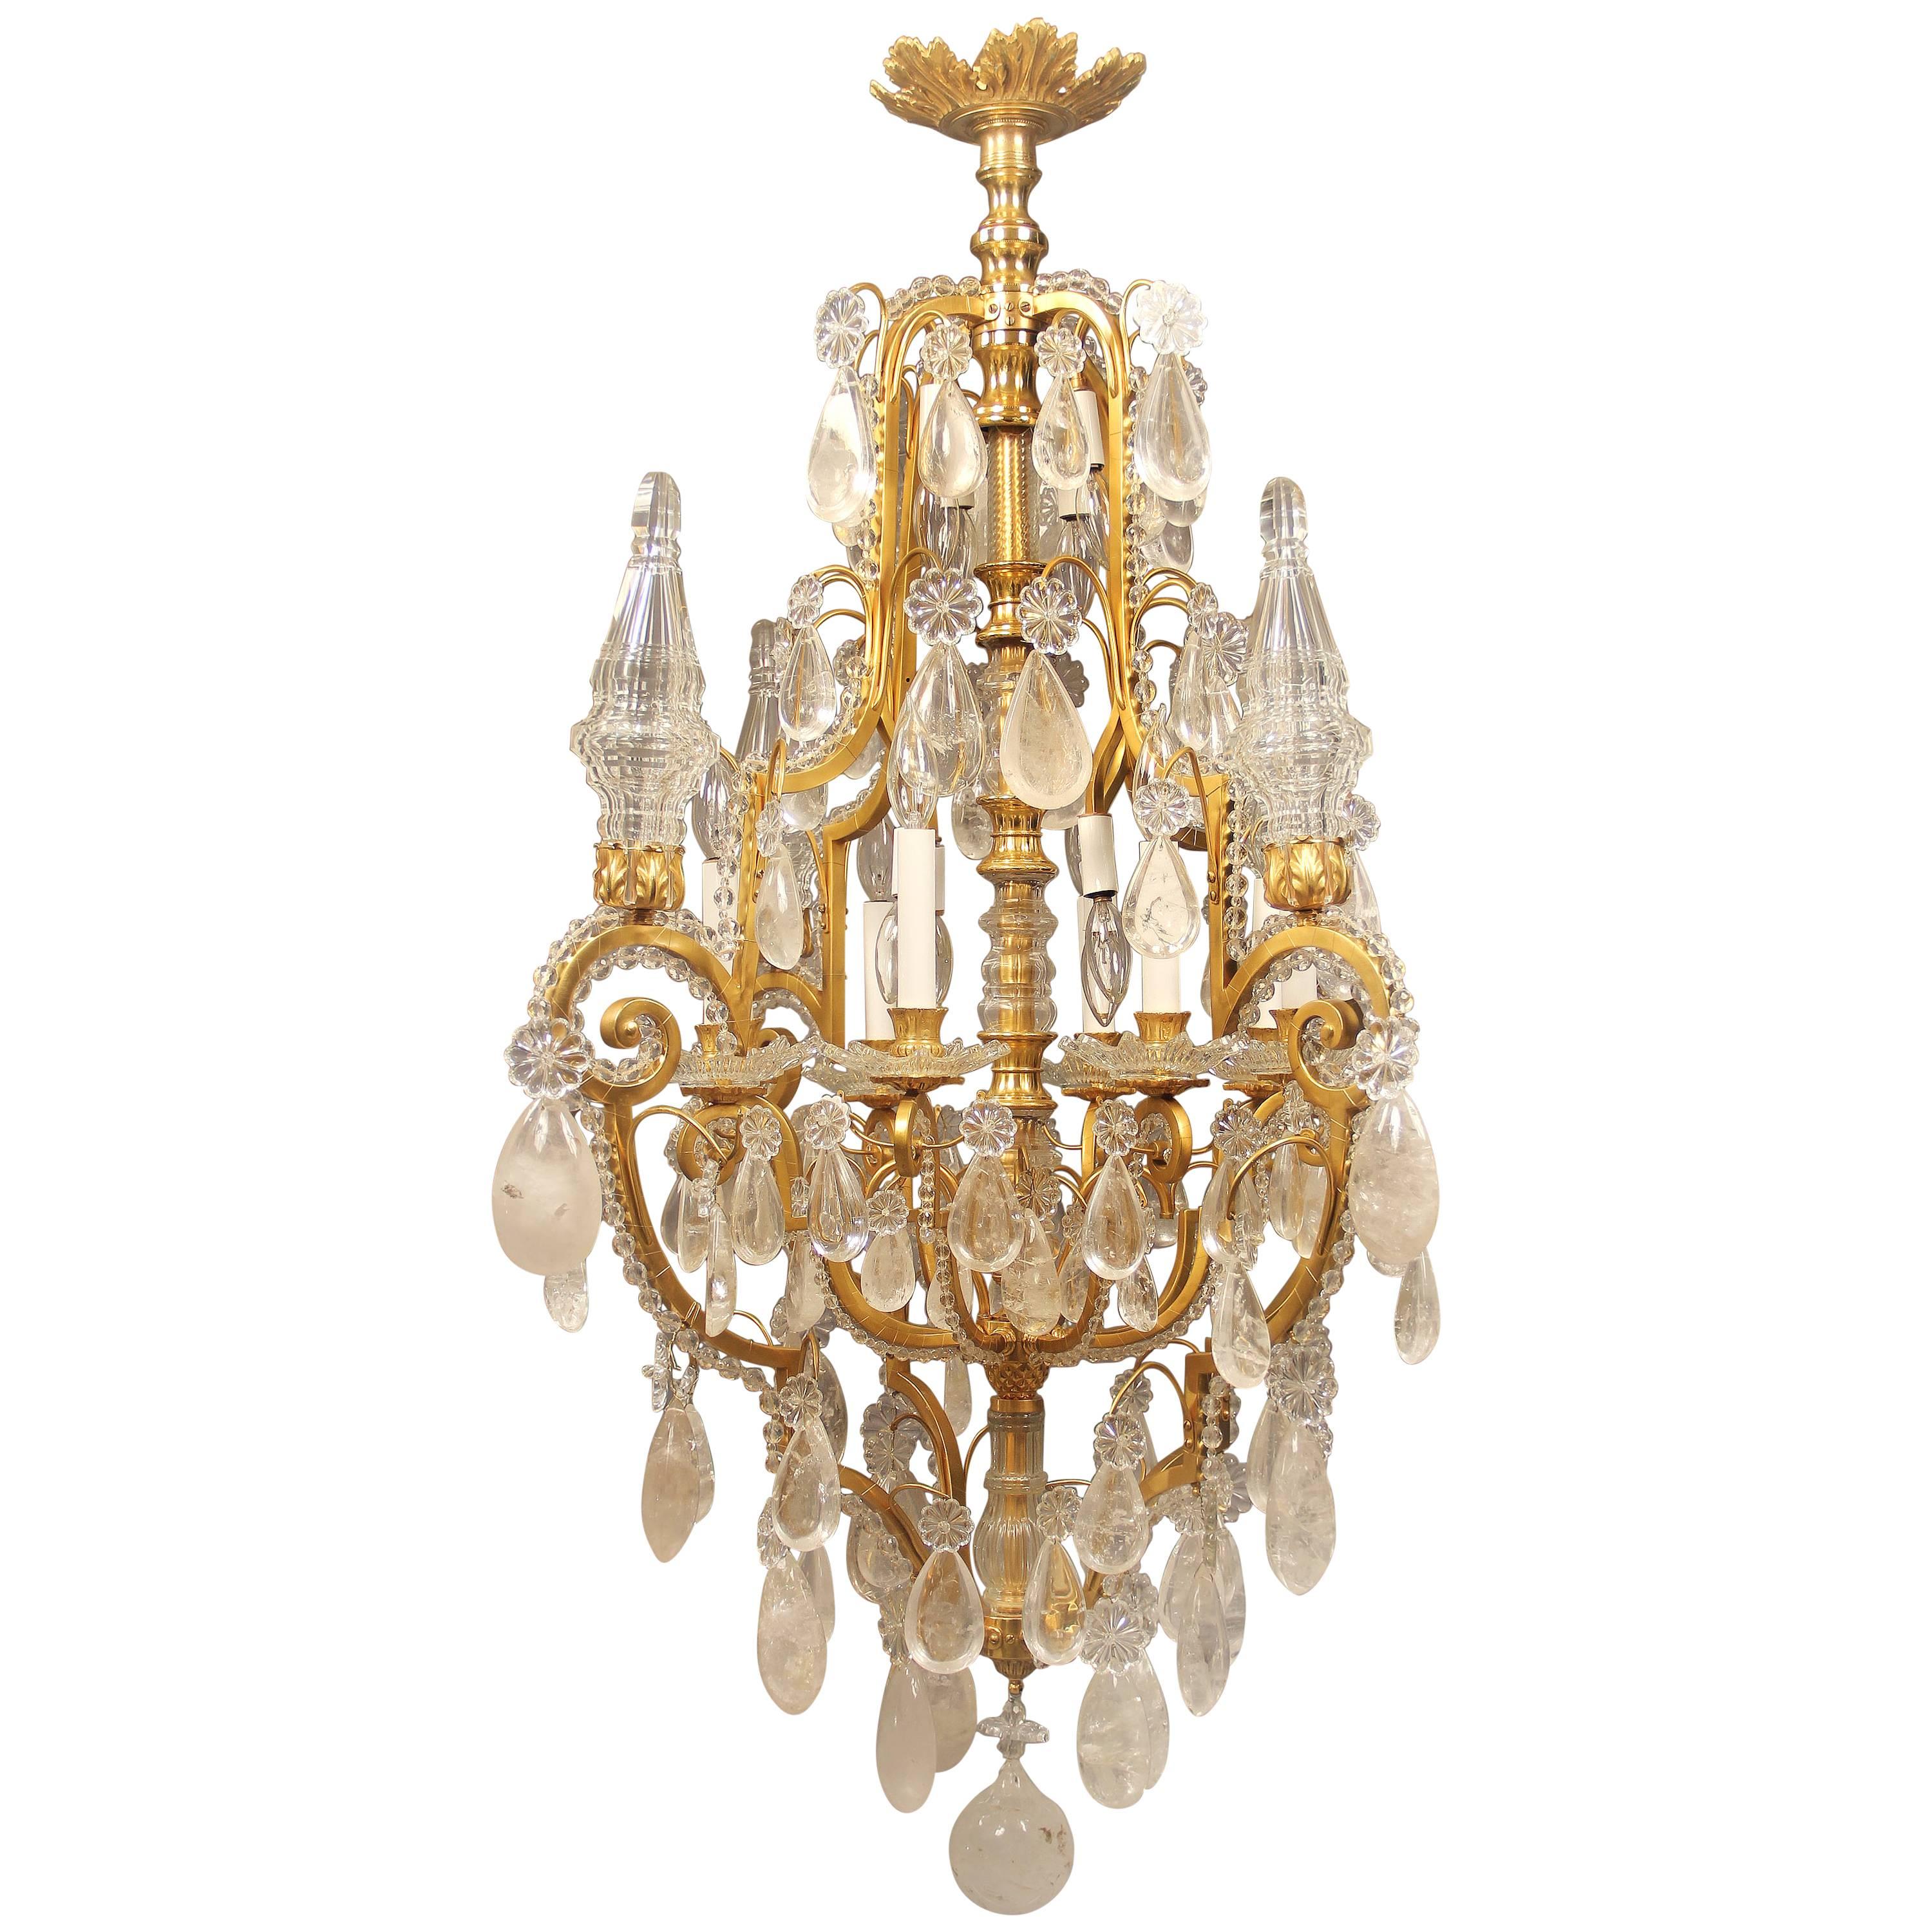 Fantastic Early 20th Century Gilt Bronze and Rock Crystal Chandelier